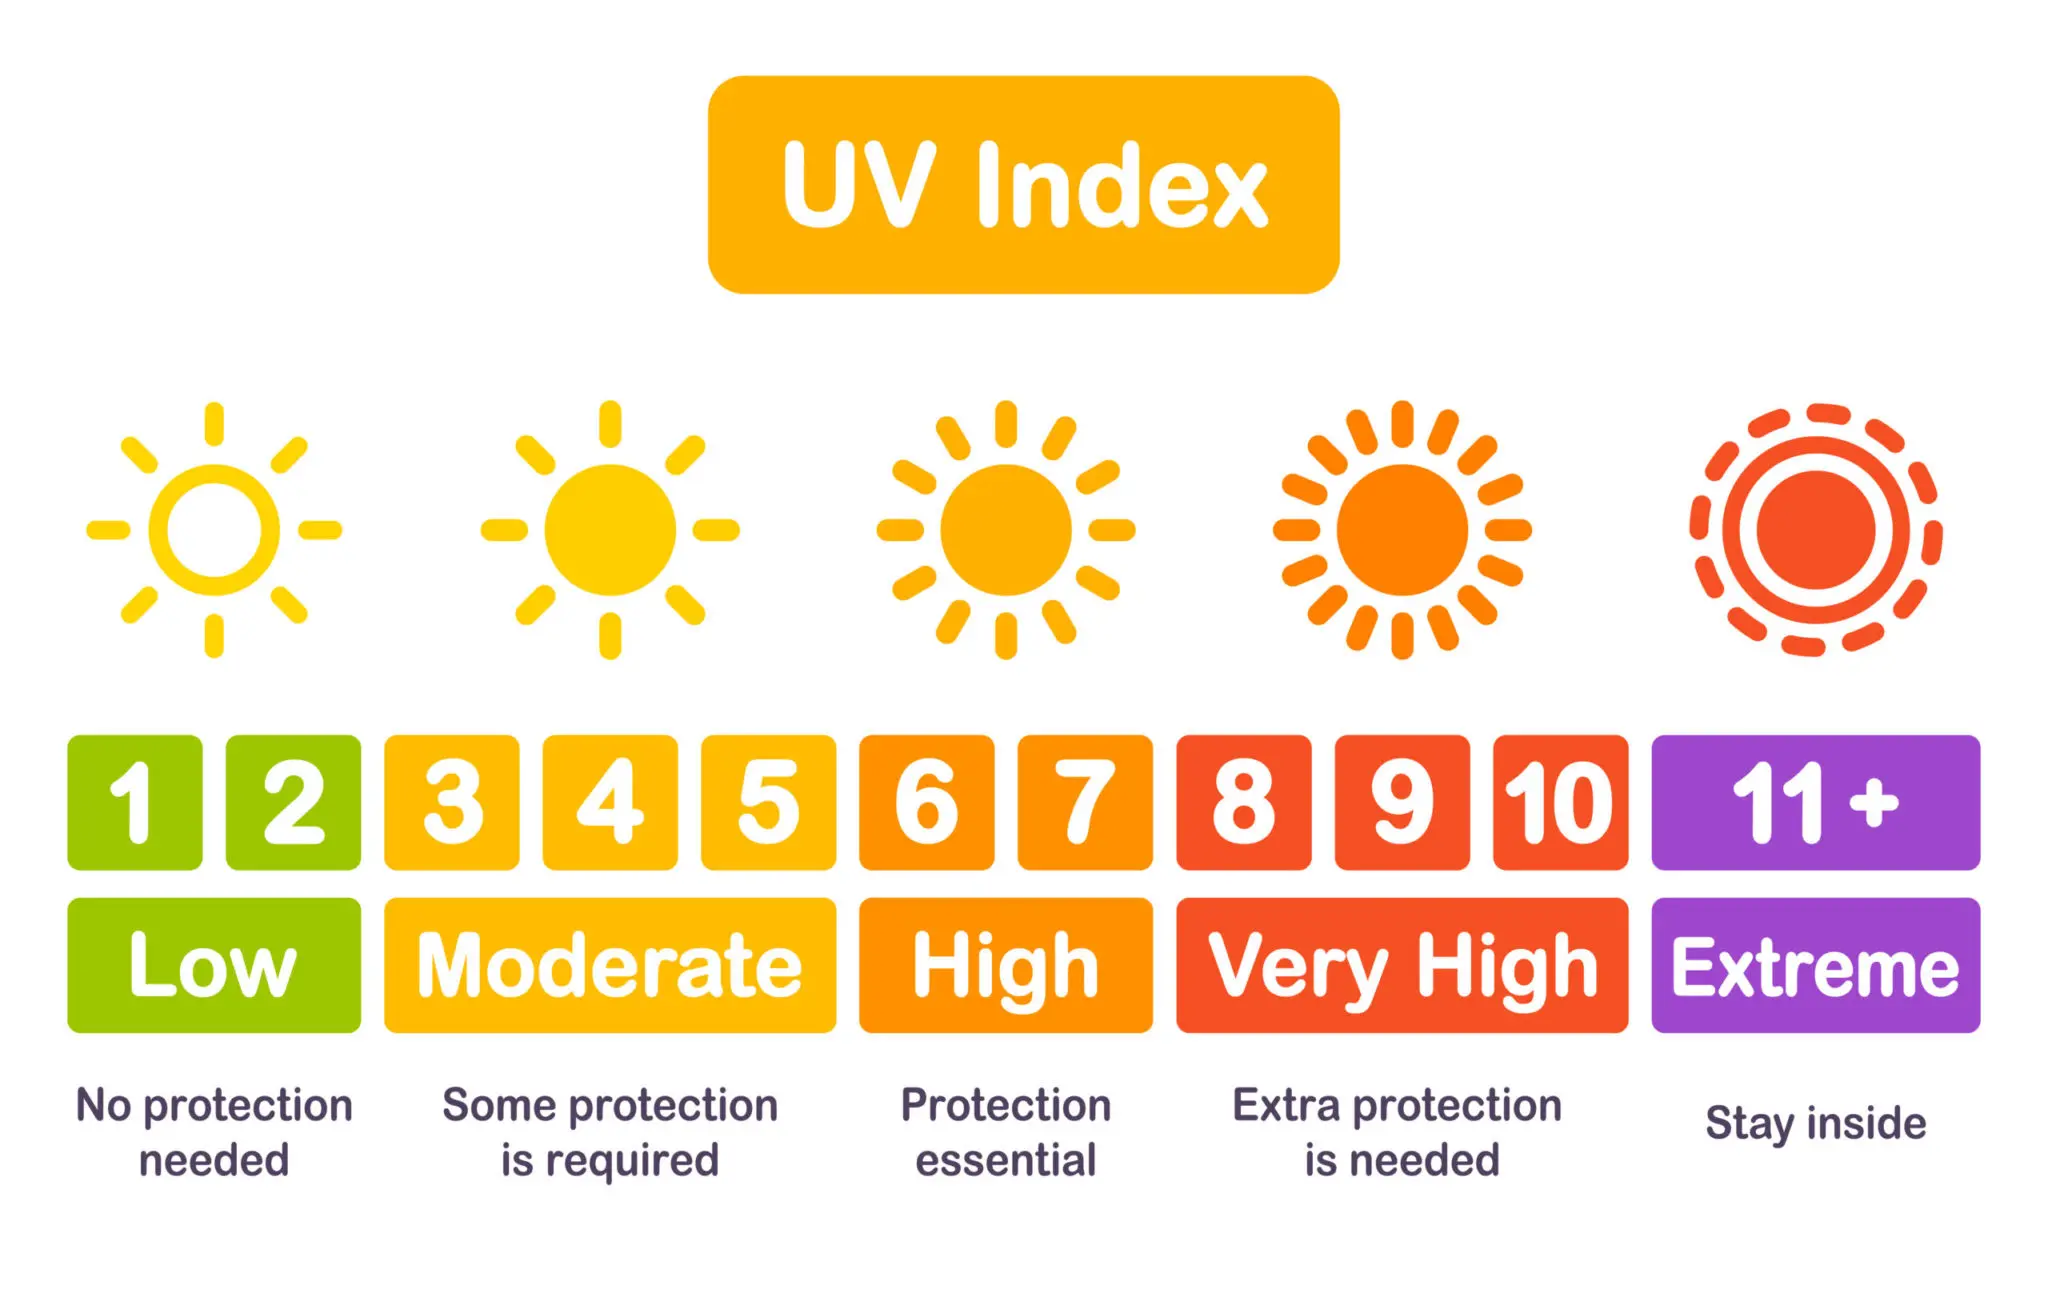 What is a Good Uv for Tanning?